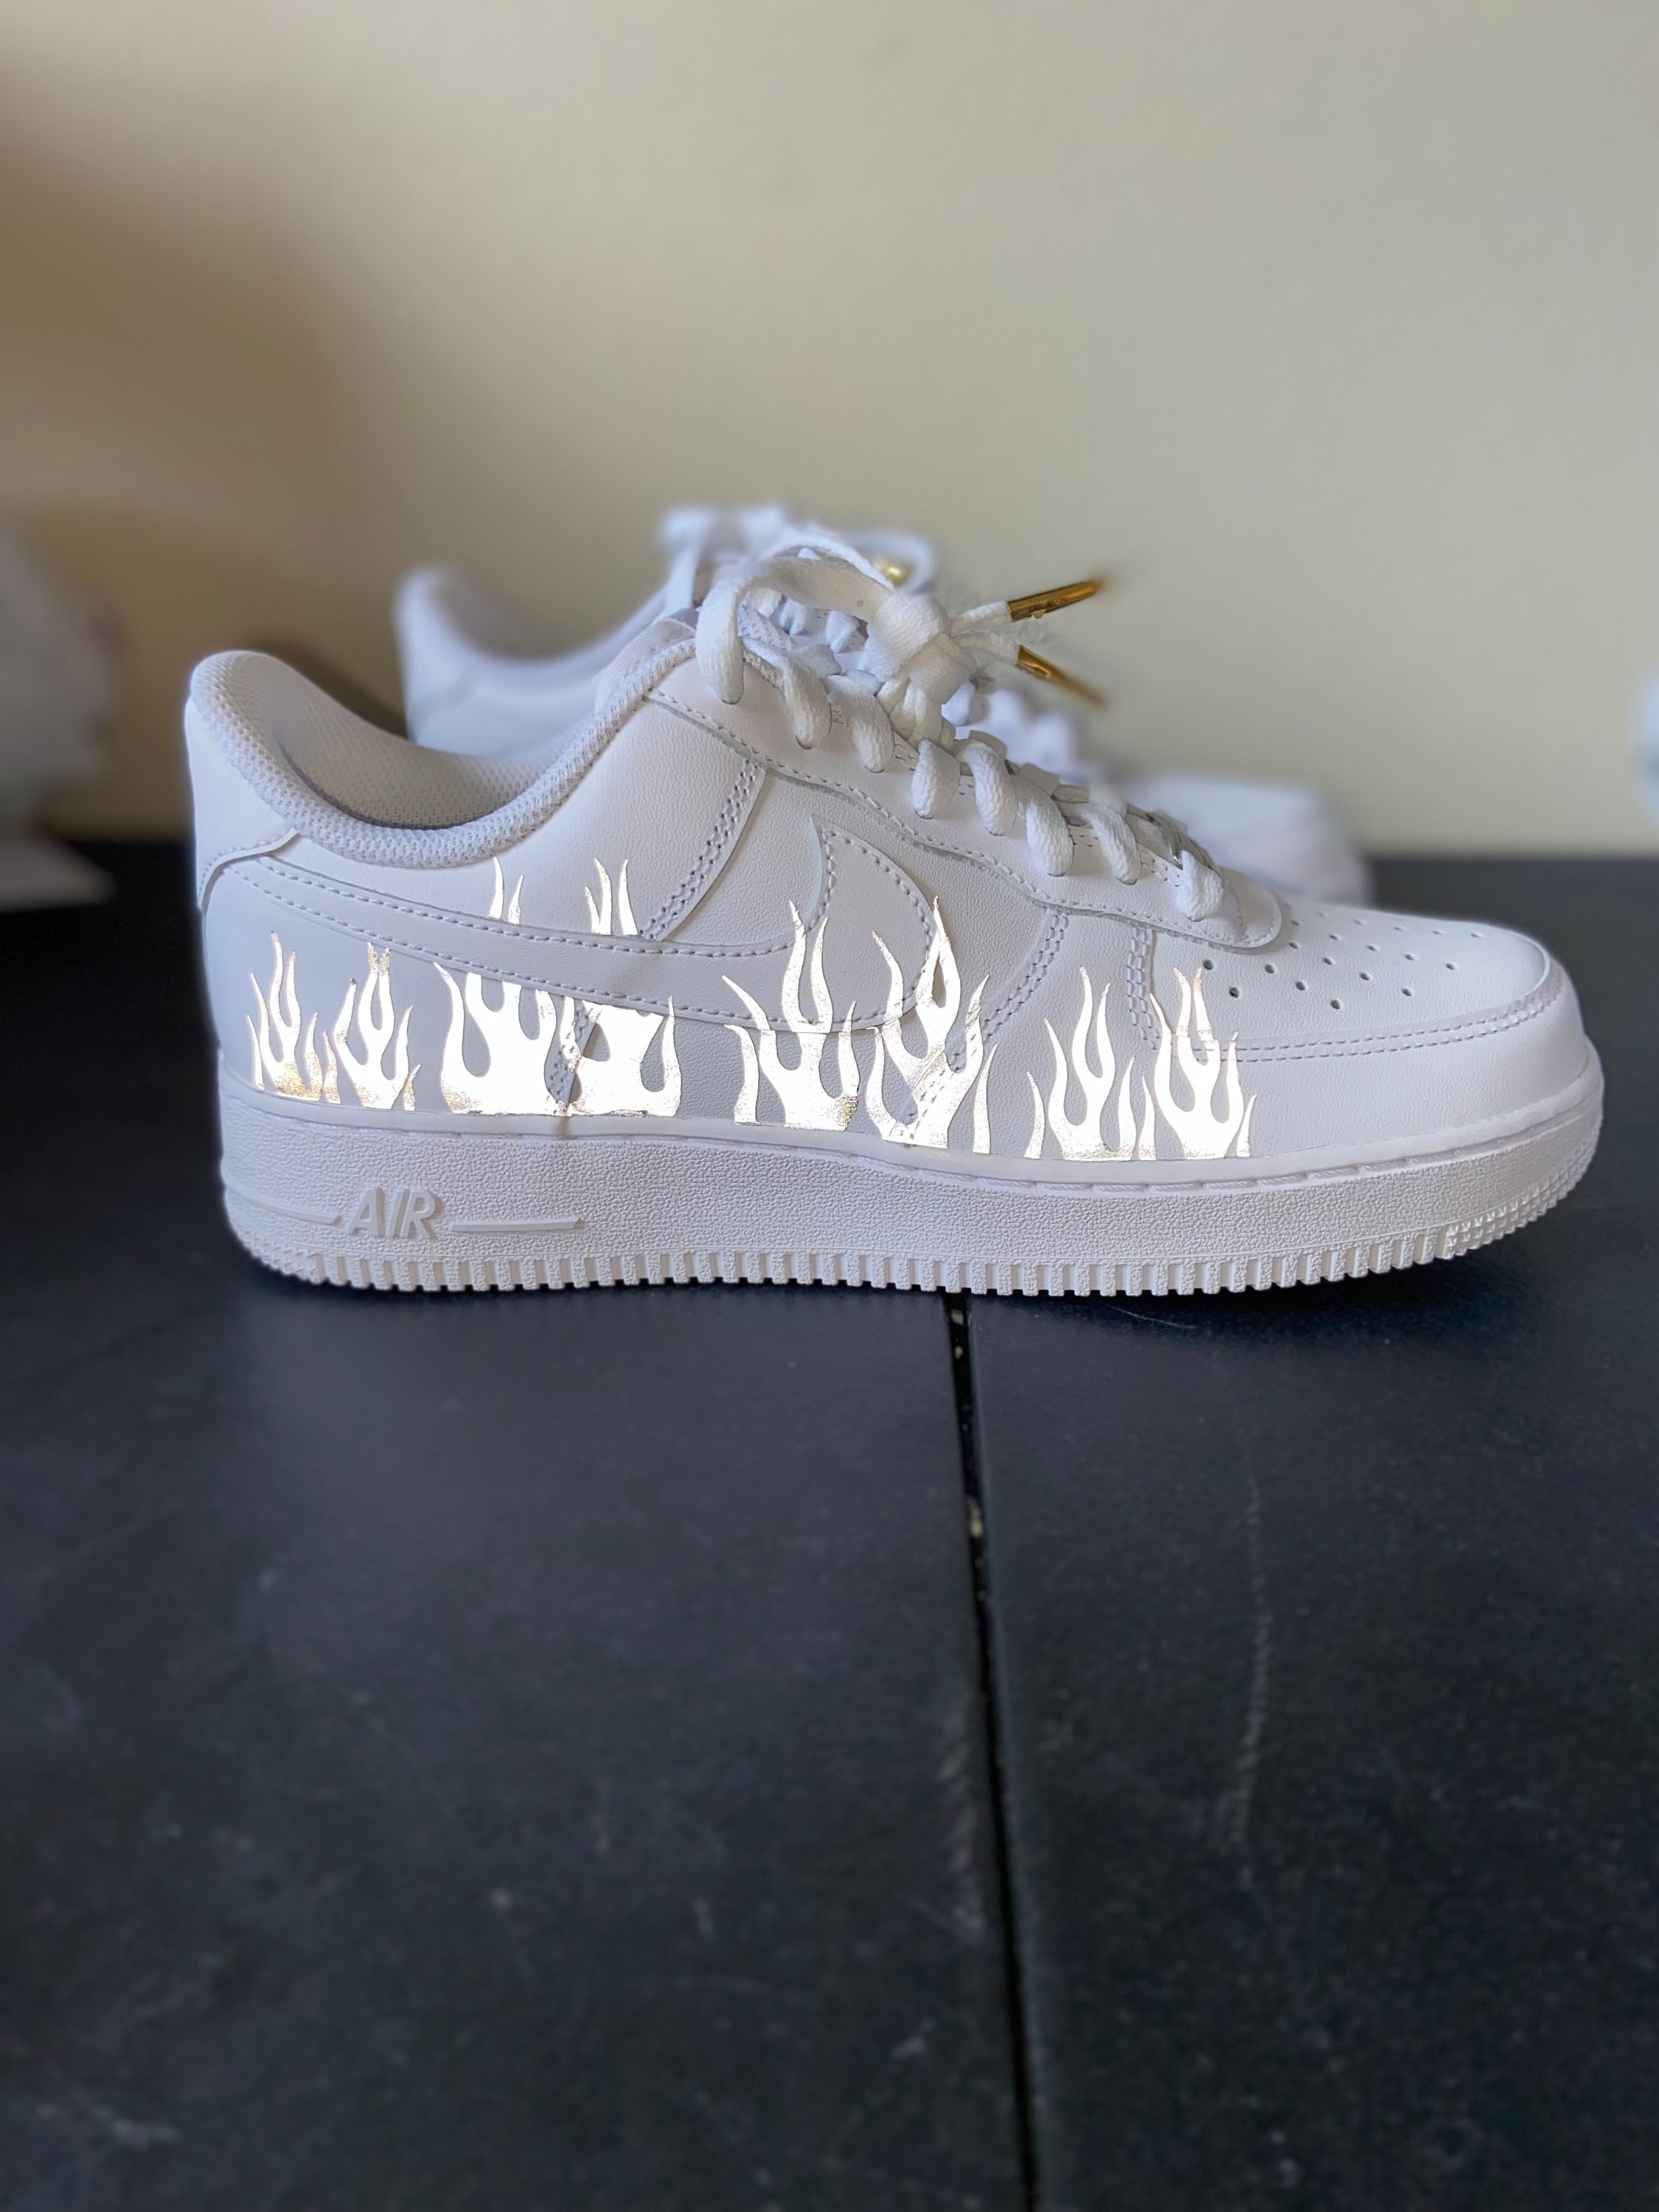 Air Force 1 Custom Shoes Low Cartoon Blue Black White Outline All Size –  Rose Customs, Air Force 1 Custom Shoes Sneakers Design Your Own AF1